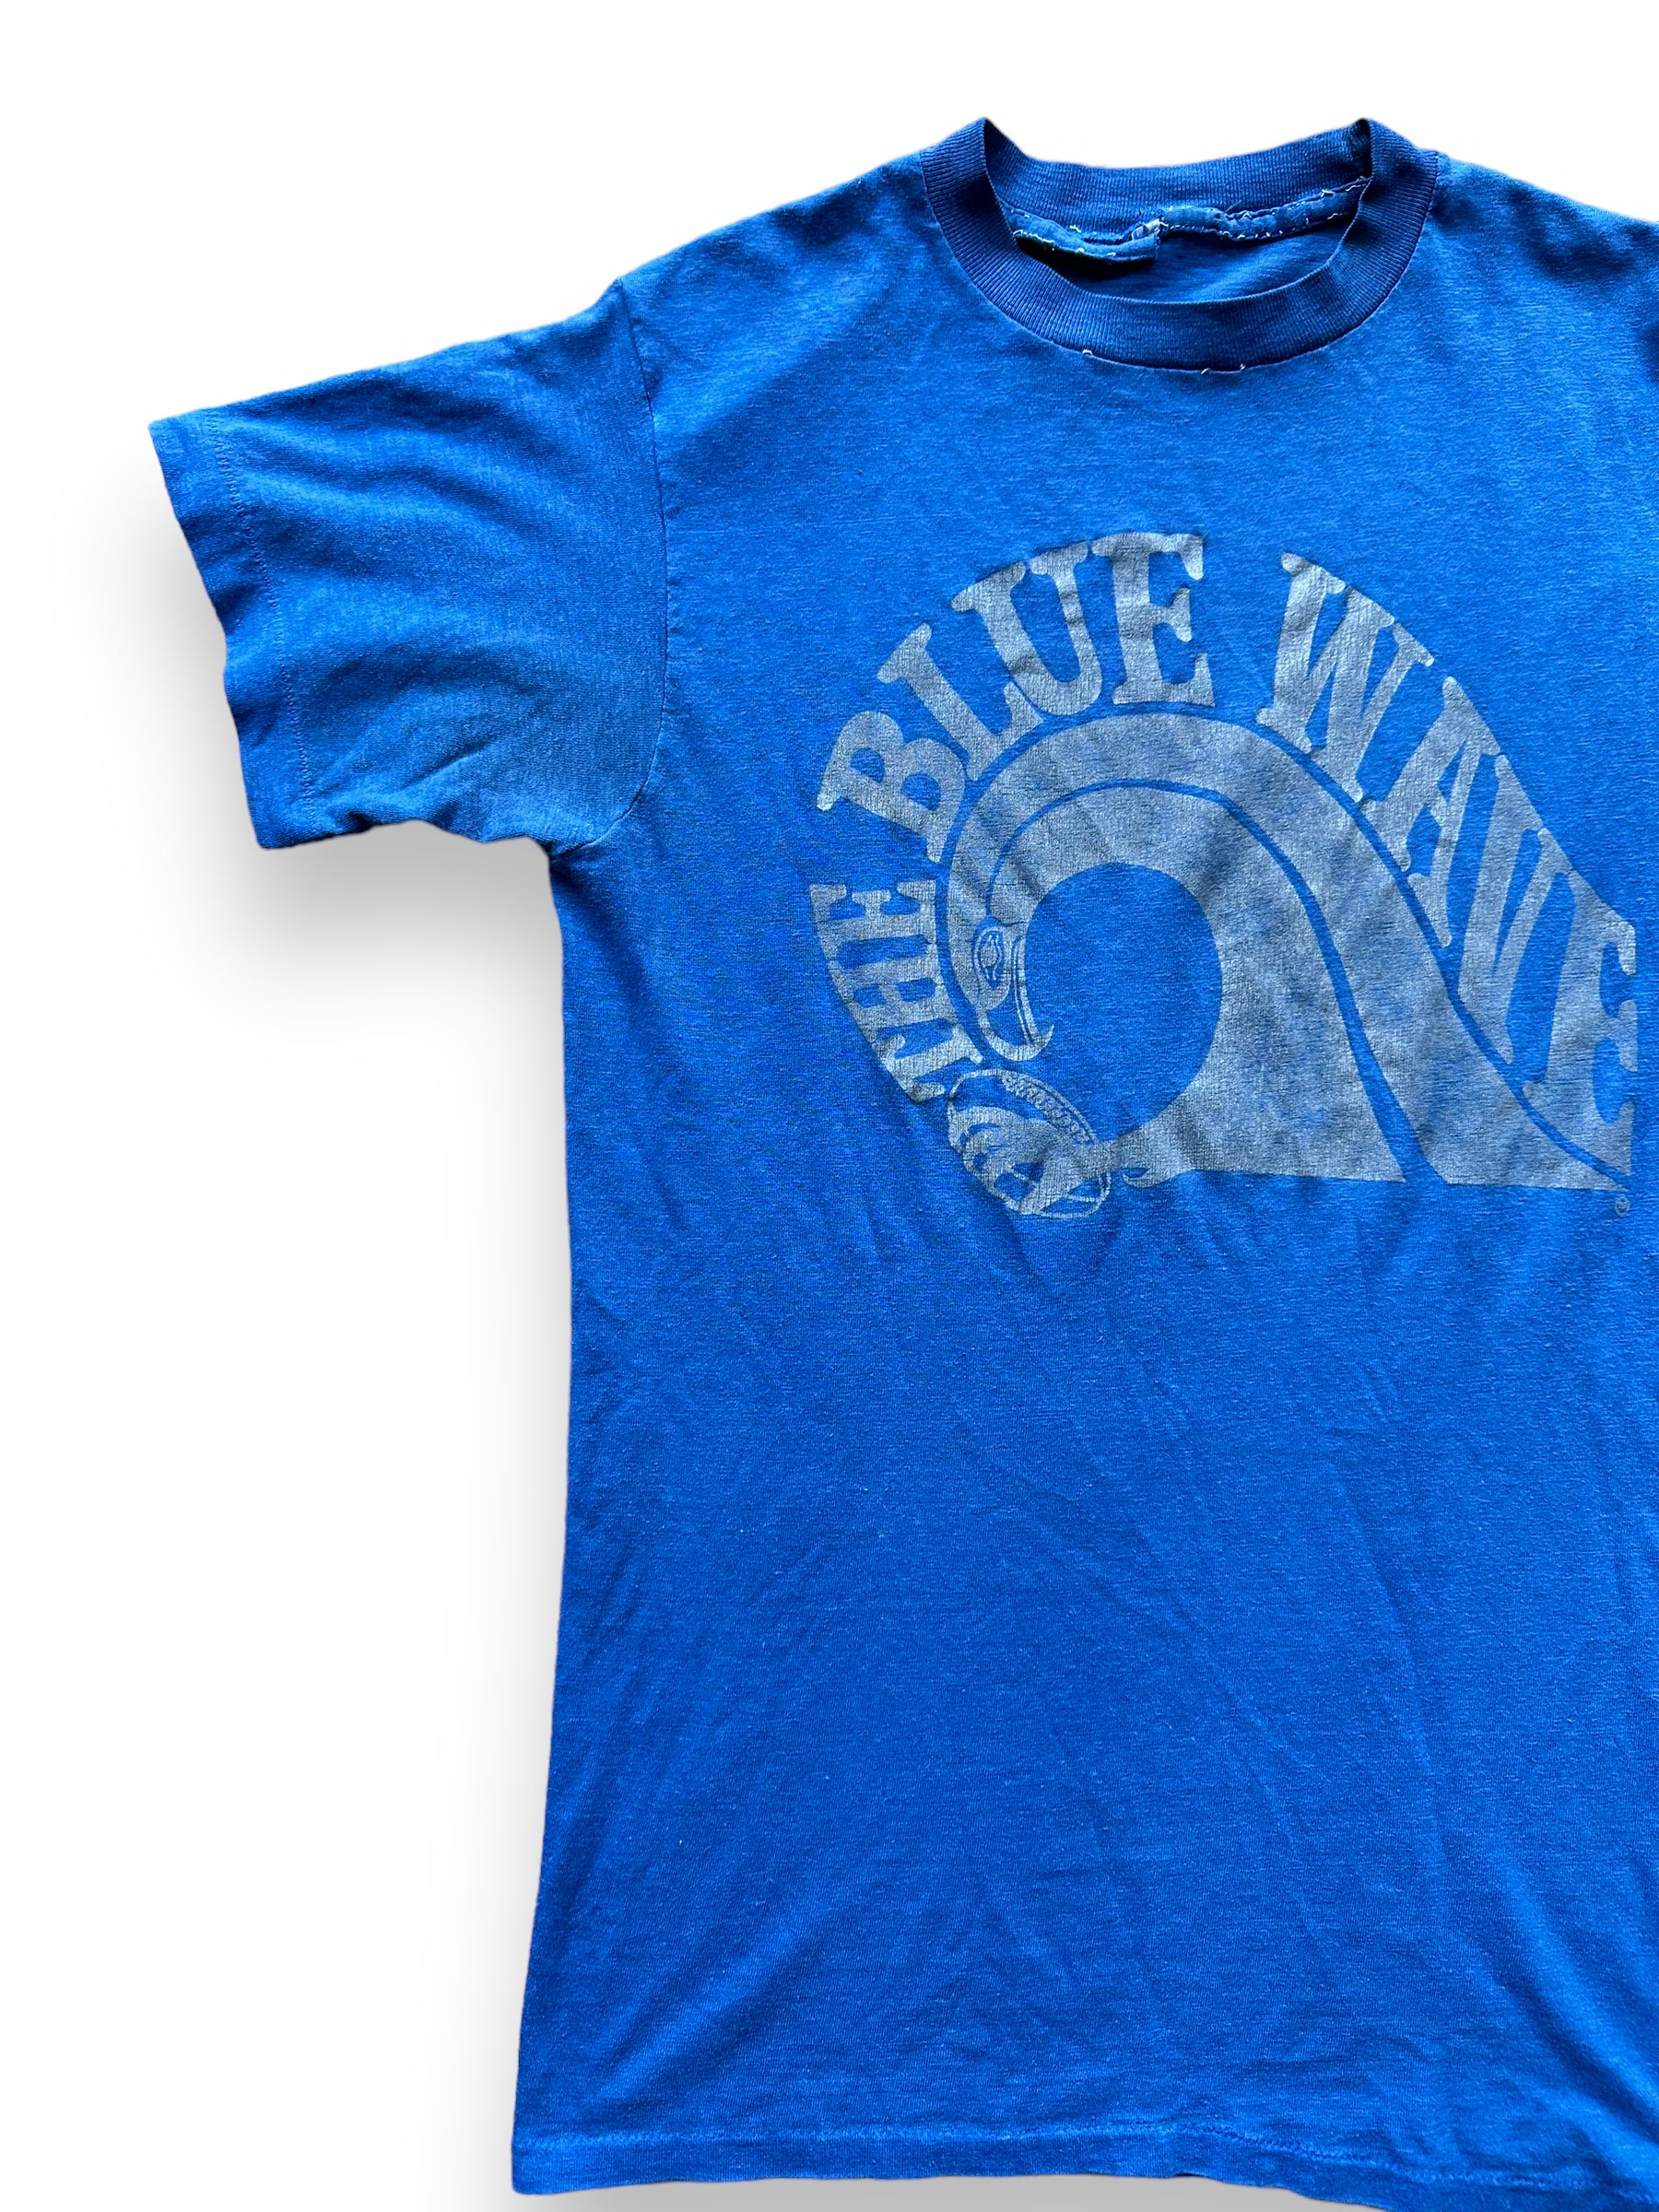 Front Right View of Vintage Seahawks Blue Wave Tee SZ S | Vintage Seahawks T-Shirts Seattle | Barn Owl Vintage Tees Seattle